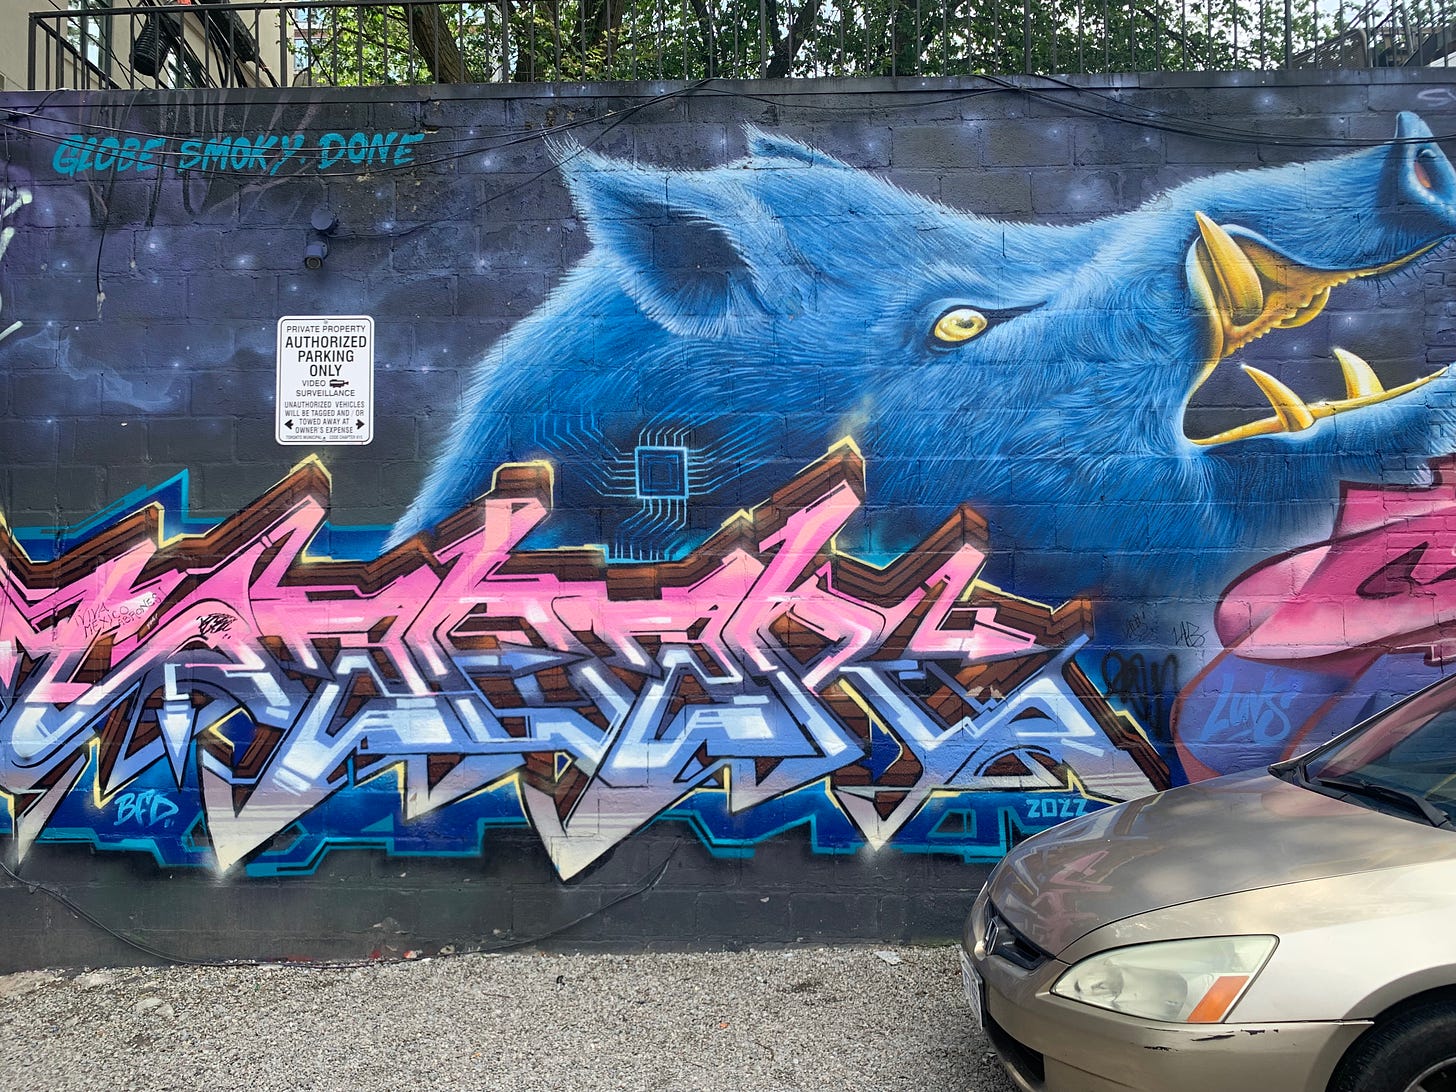 A mural with a blue and pink metallic-looking tag reminiscent of 80s/90s video game art with the head of a blue pig with gold teeth in the background, floating in space.